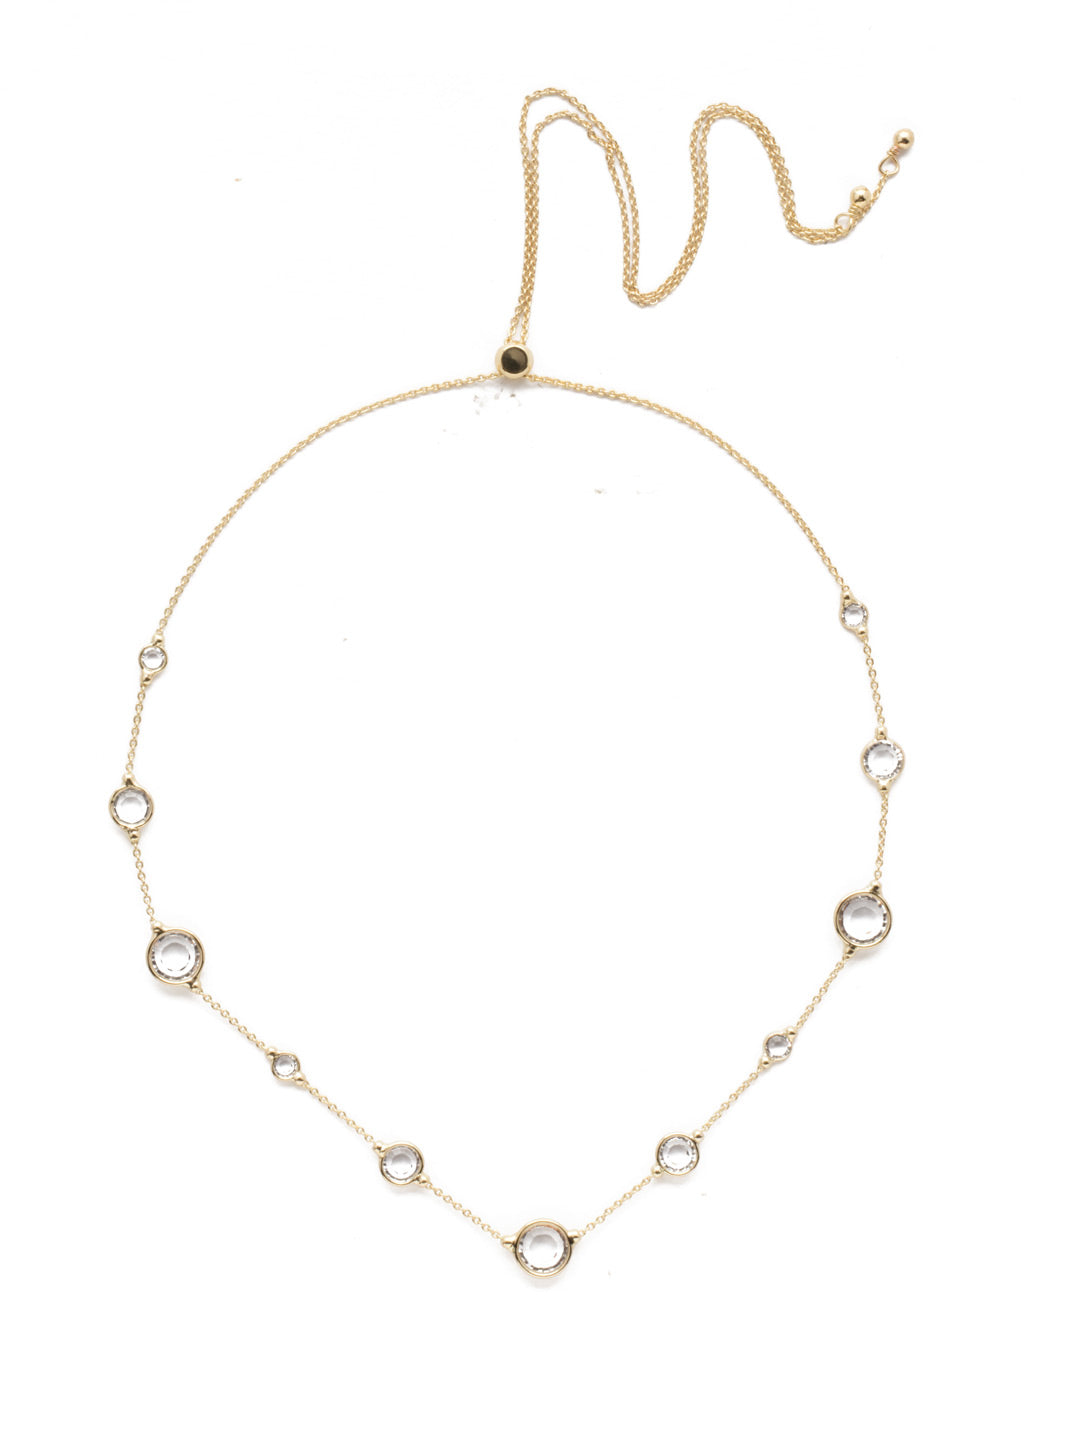 Inner Orbit Crystal Tennis Necklace - 4NEK34BGCRY - <p>Small, medium and large crystal gems get equal time and attention in this classic slider necklace you're sure to reach for again and again. From Sorrelli's Crystal collection in our Bright Gold-tone finish.</p>